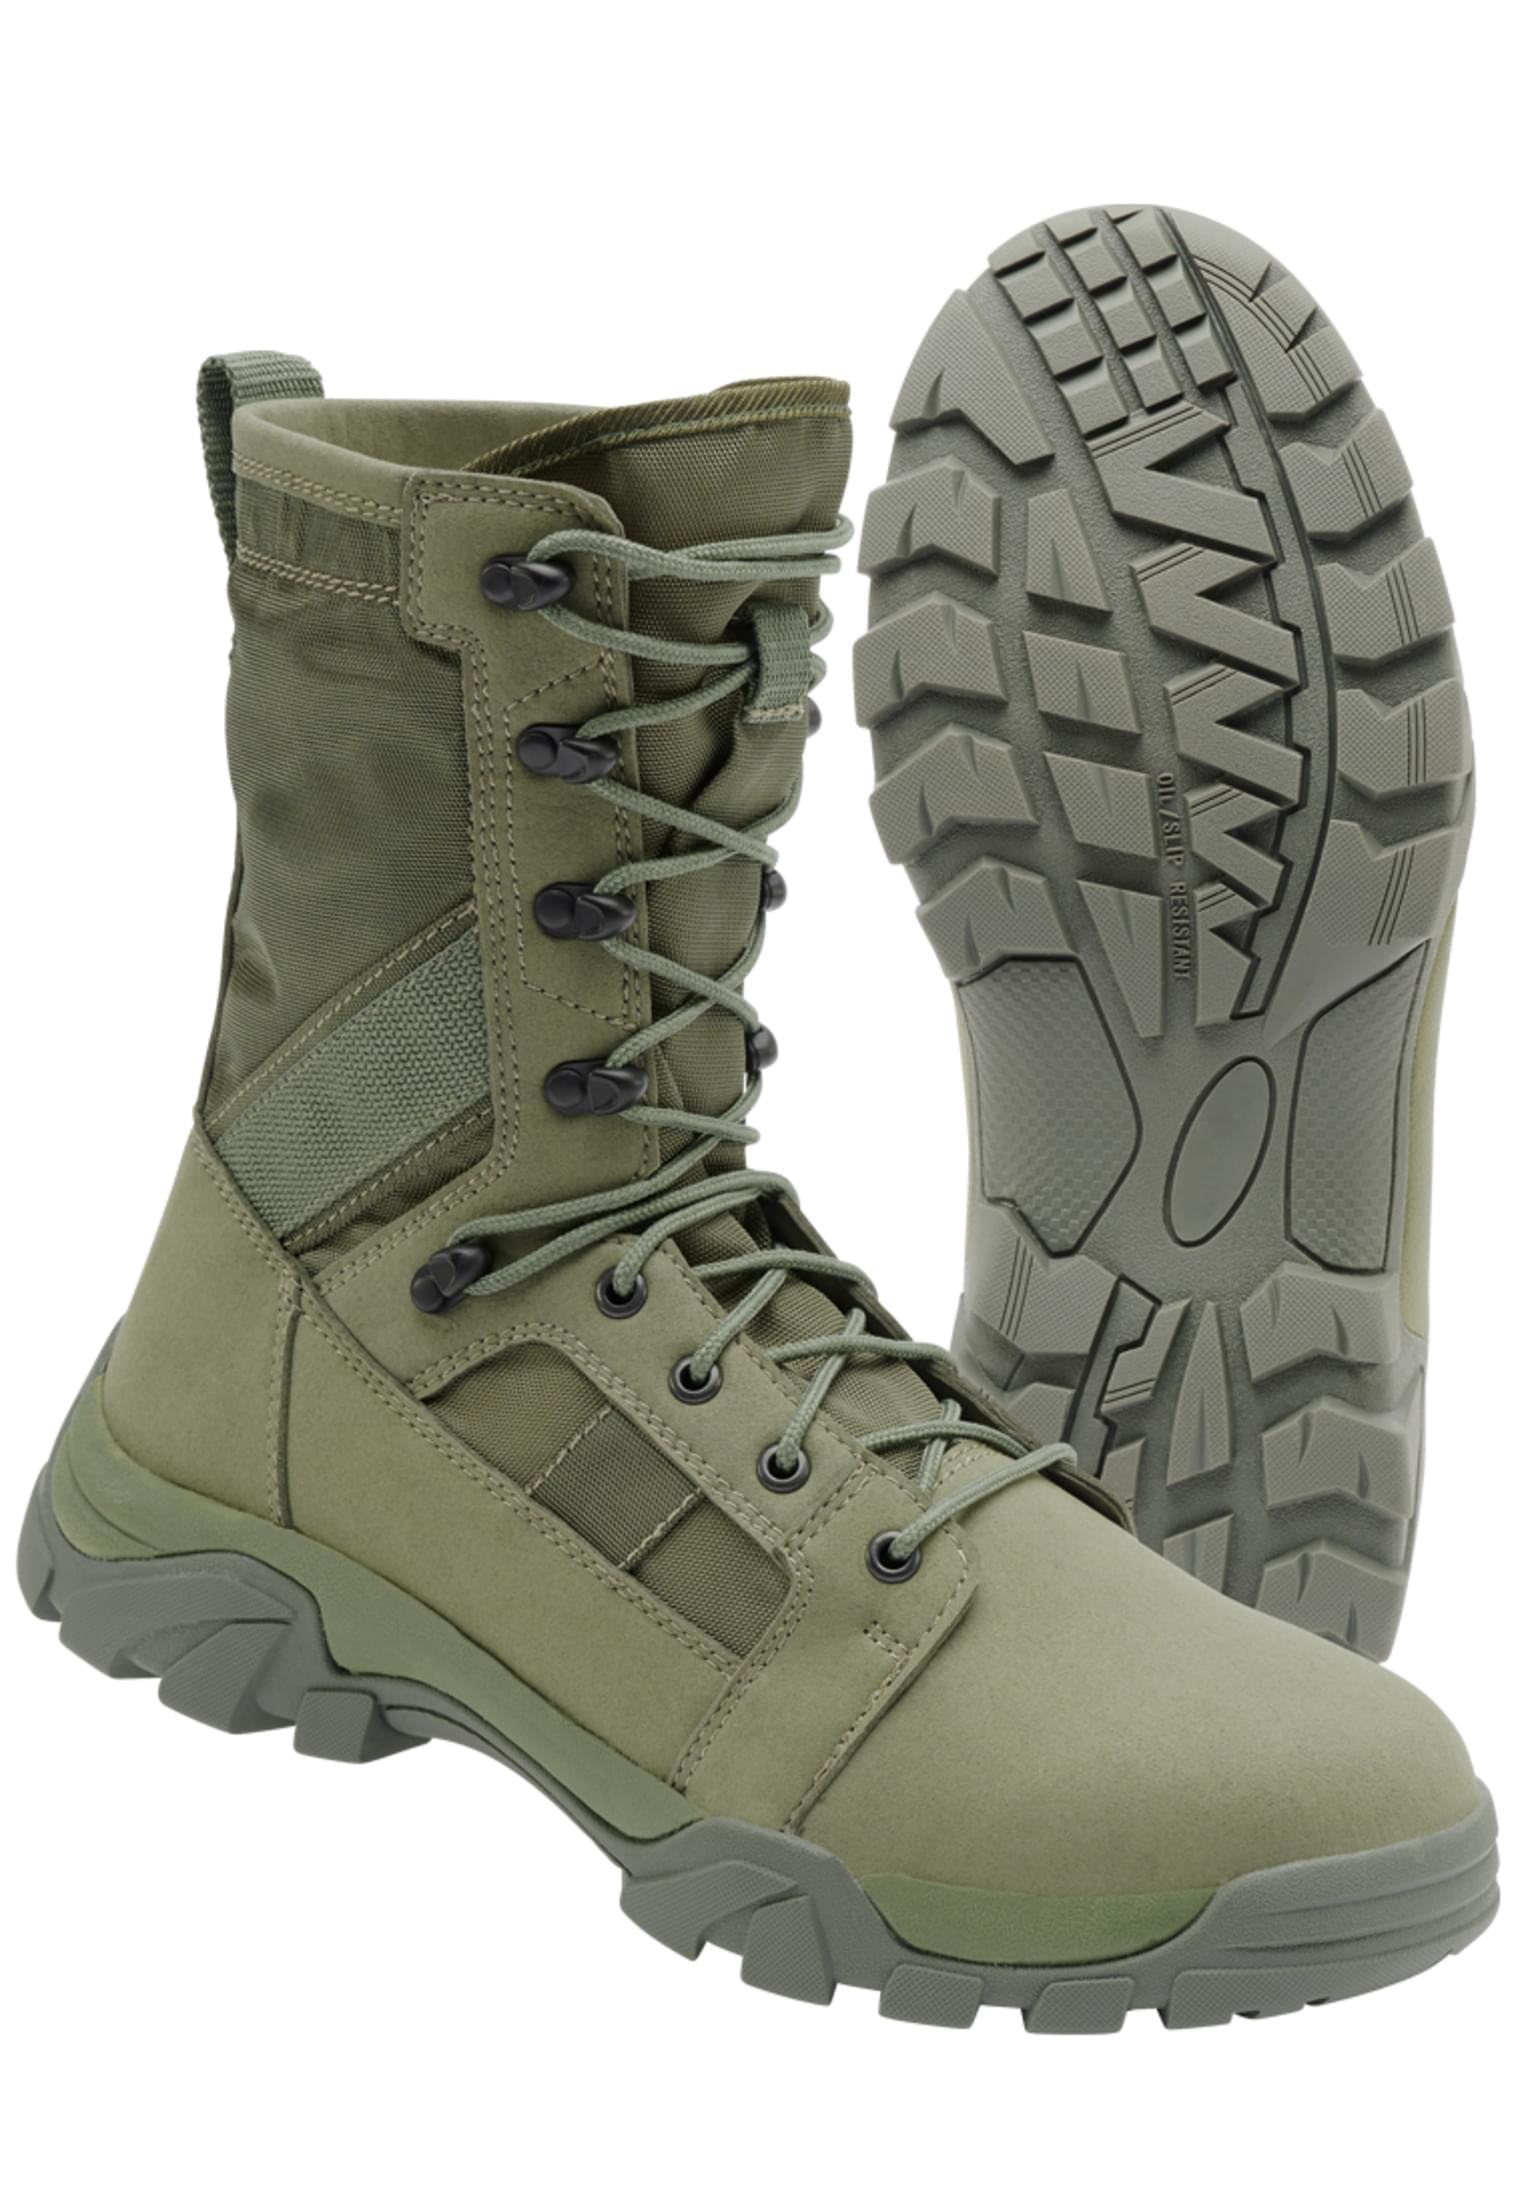 Schuhe Defense Boot in Farbe olive